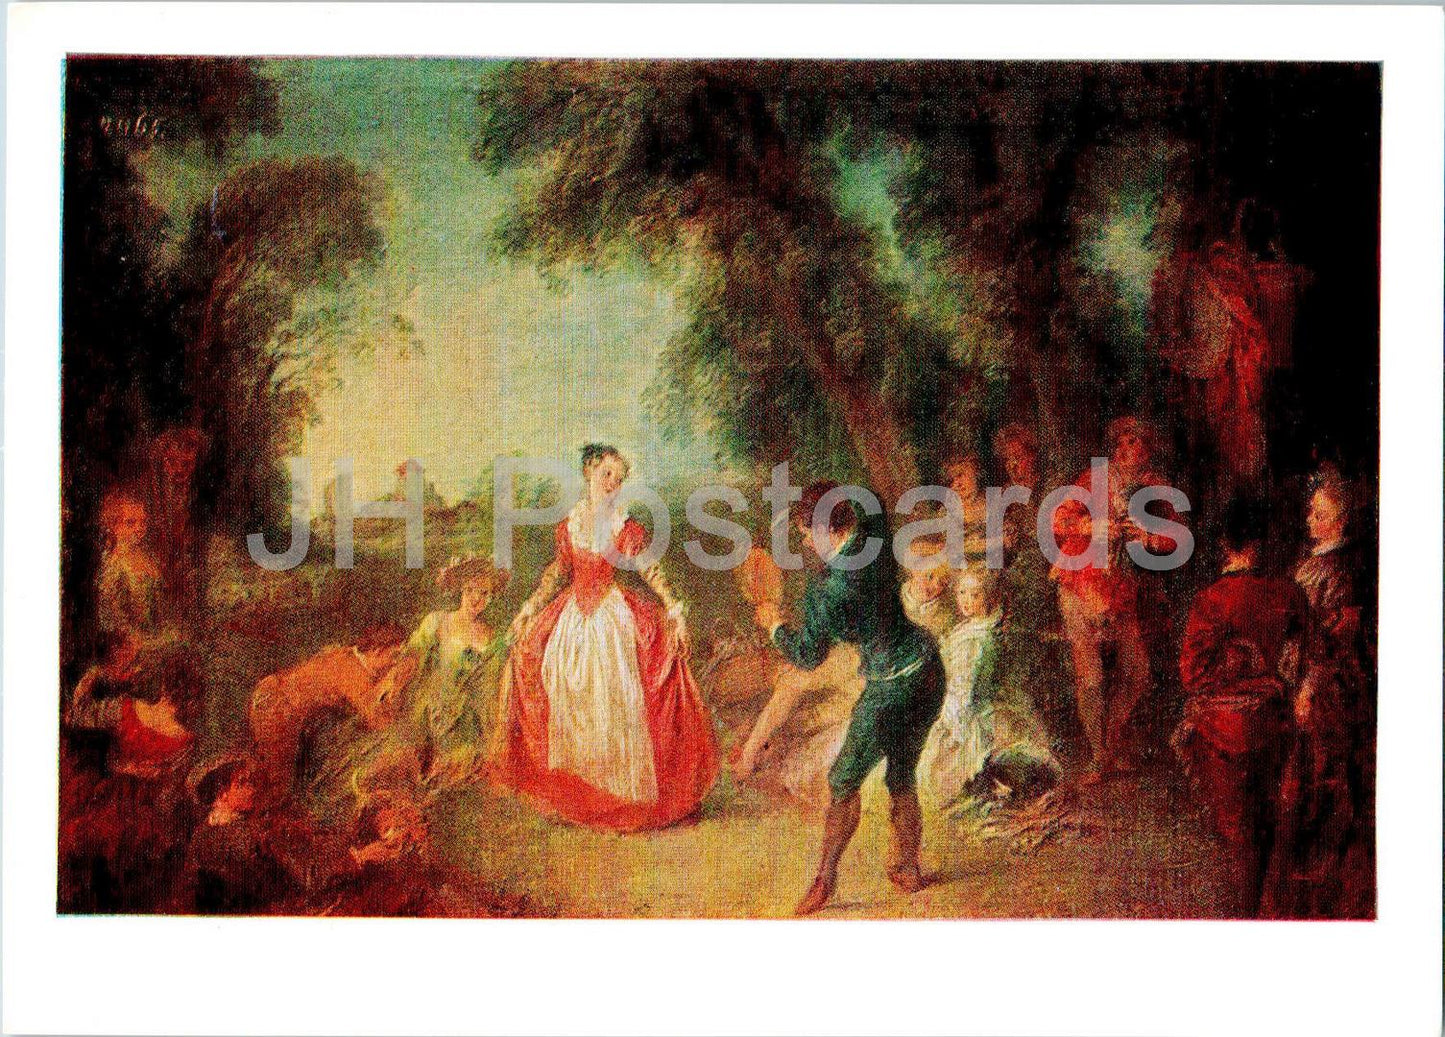 painting by Jean-Baptiste Pater - Contredanse under the tree - French art - 1985 - Russia USSR - unused